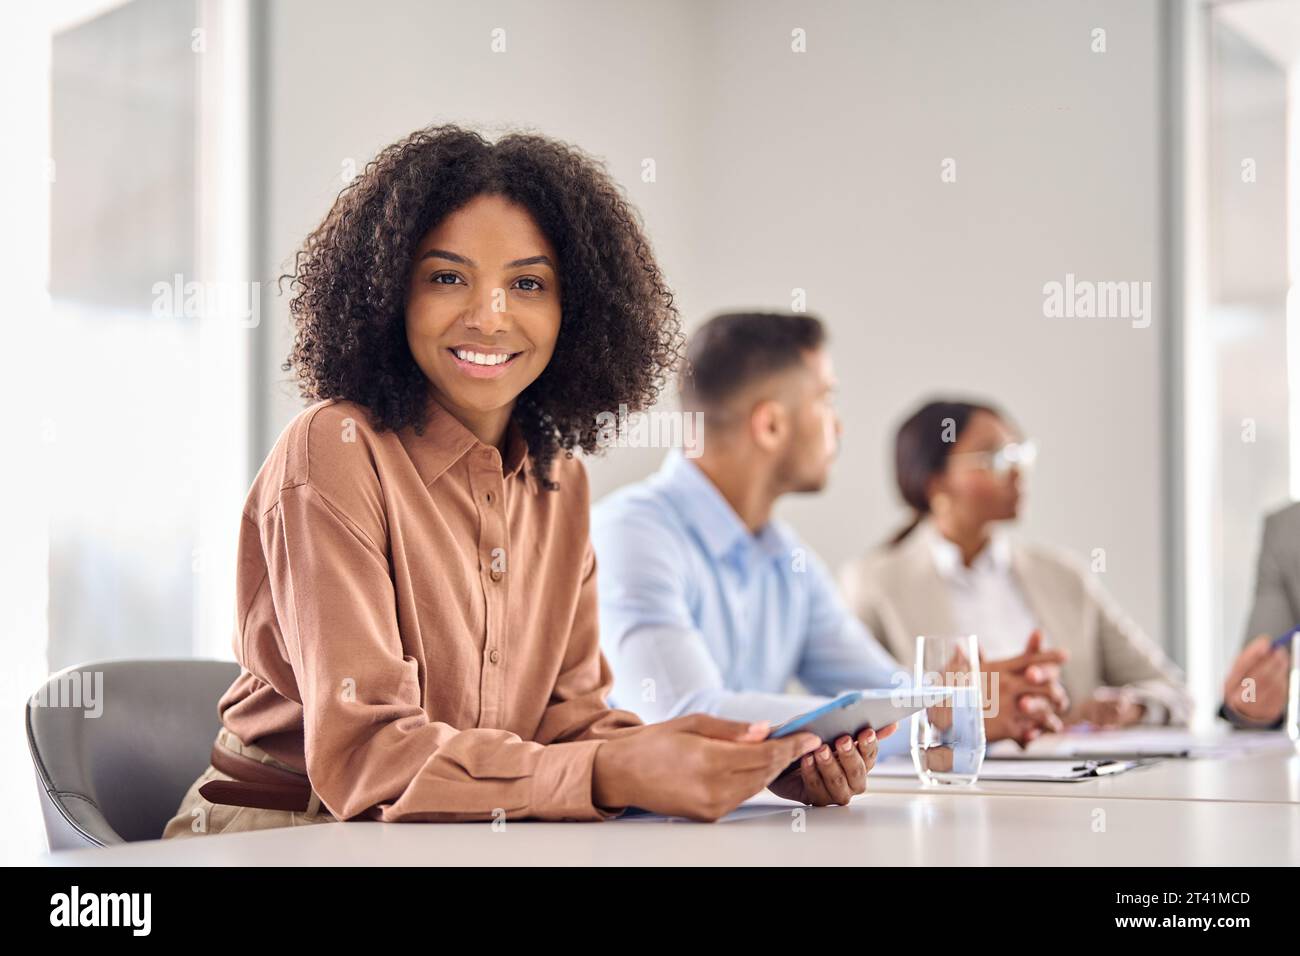 Smiling young African American business woman at office meeting, portrait. Stock Photo